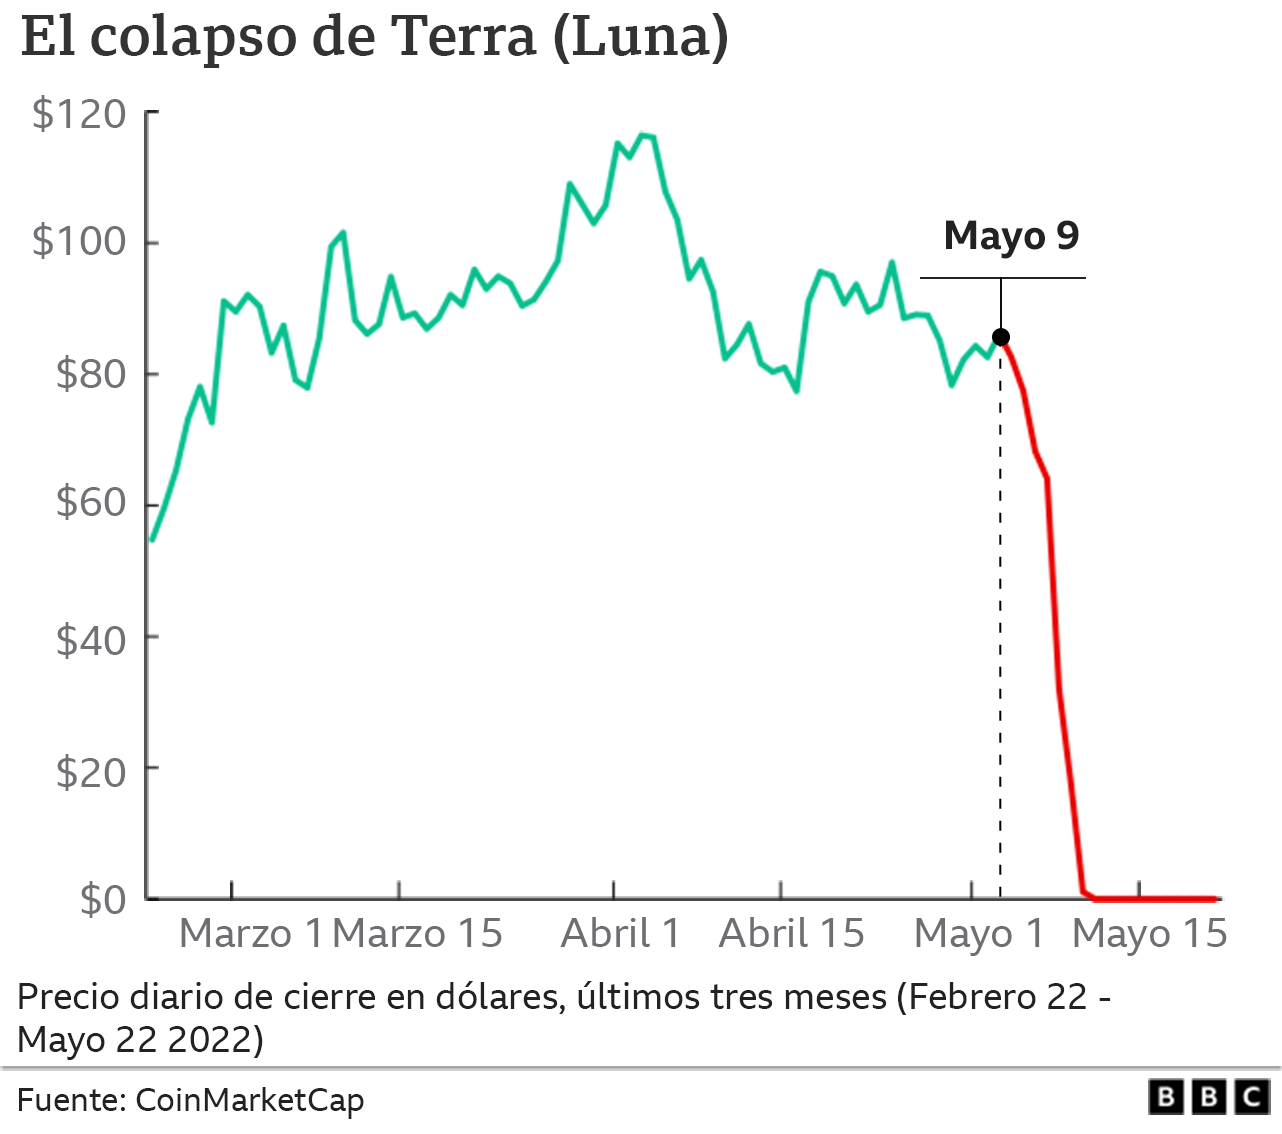 Graphic shows the collapse of Terra Luna